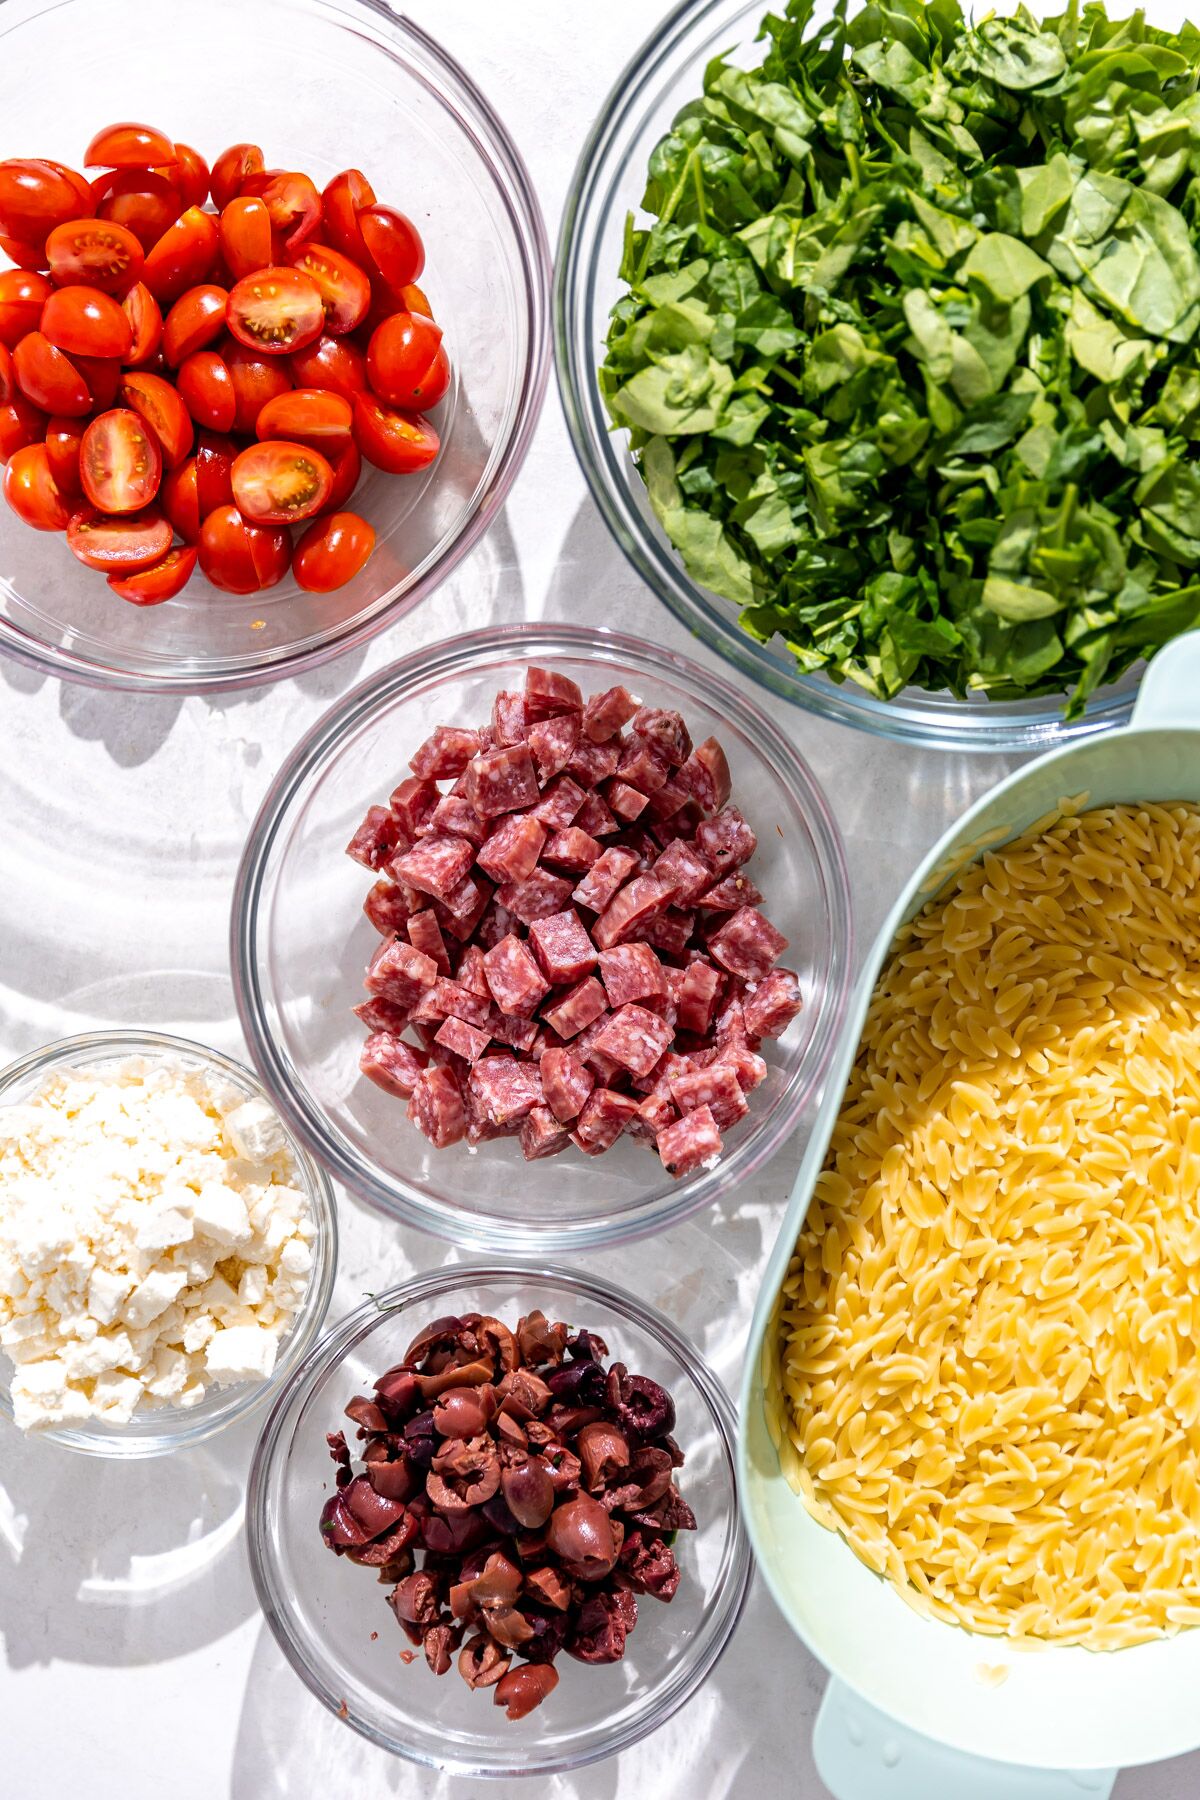 All of the ingredients needed for Mediterranean Pasta Salad.